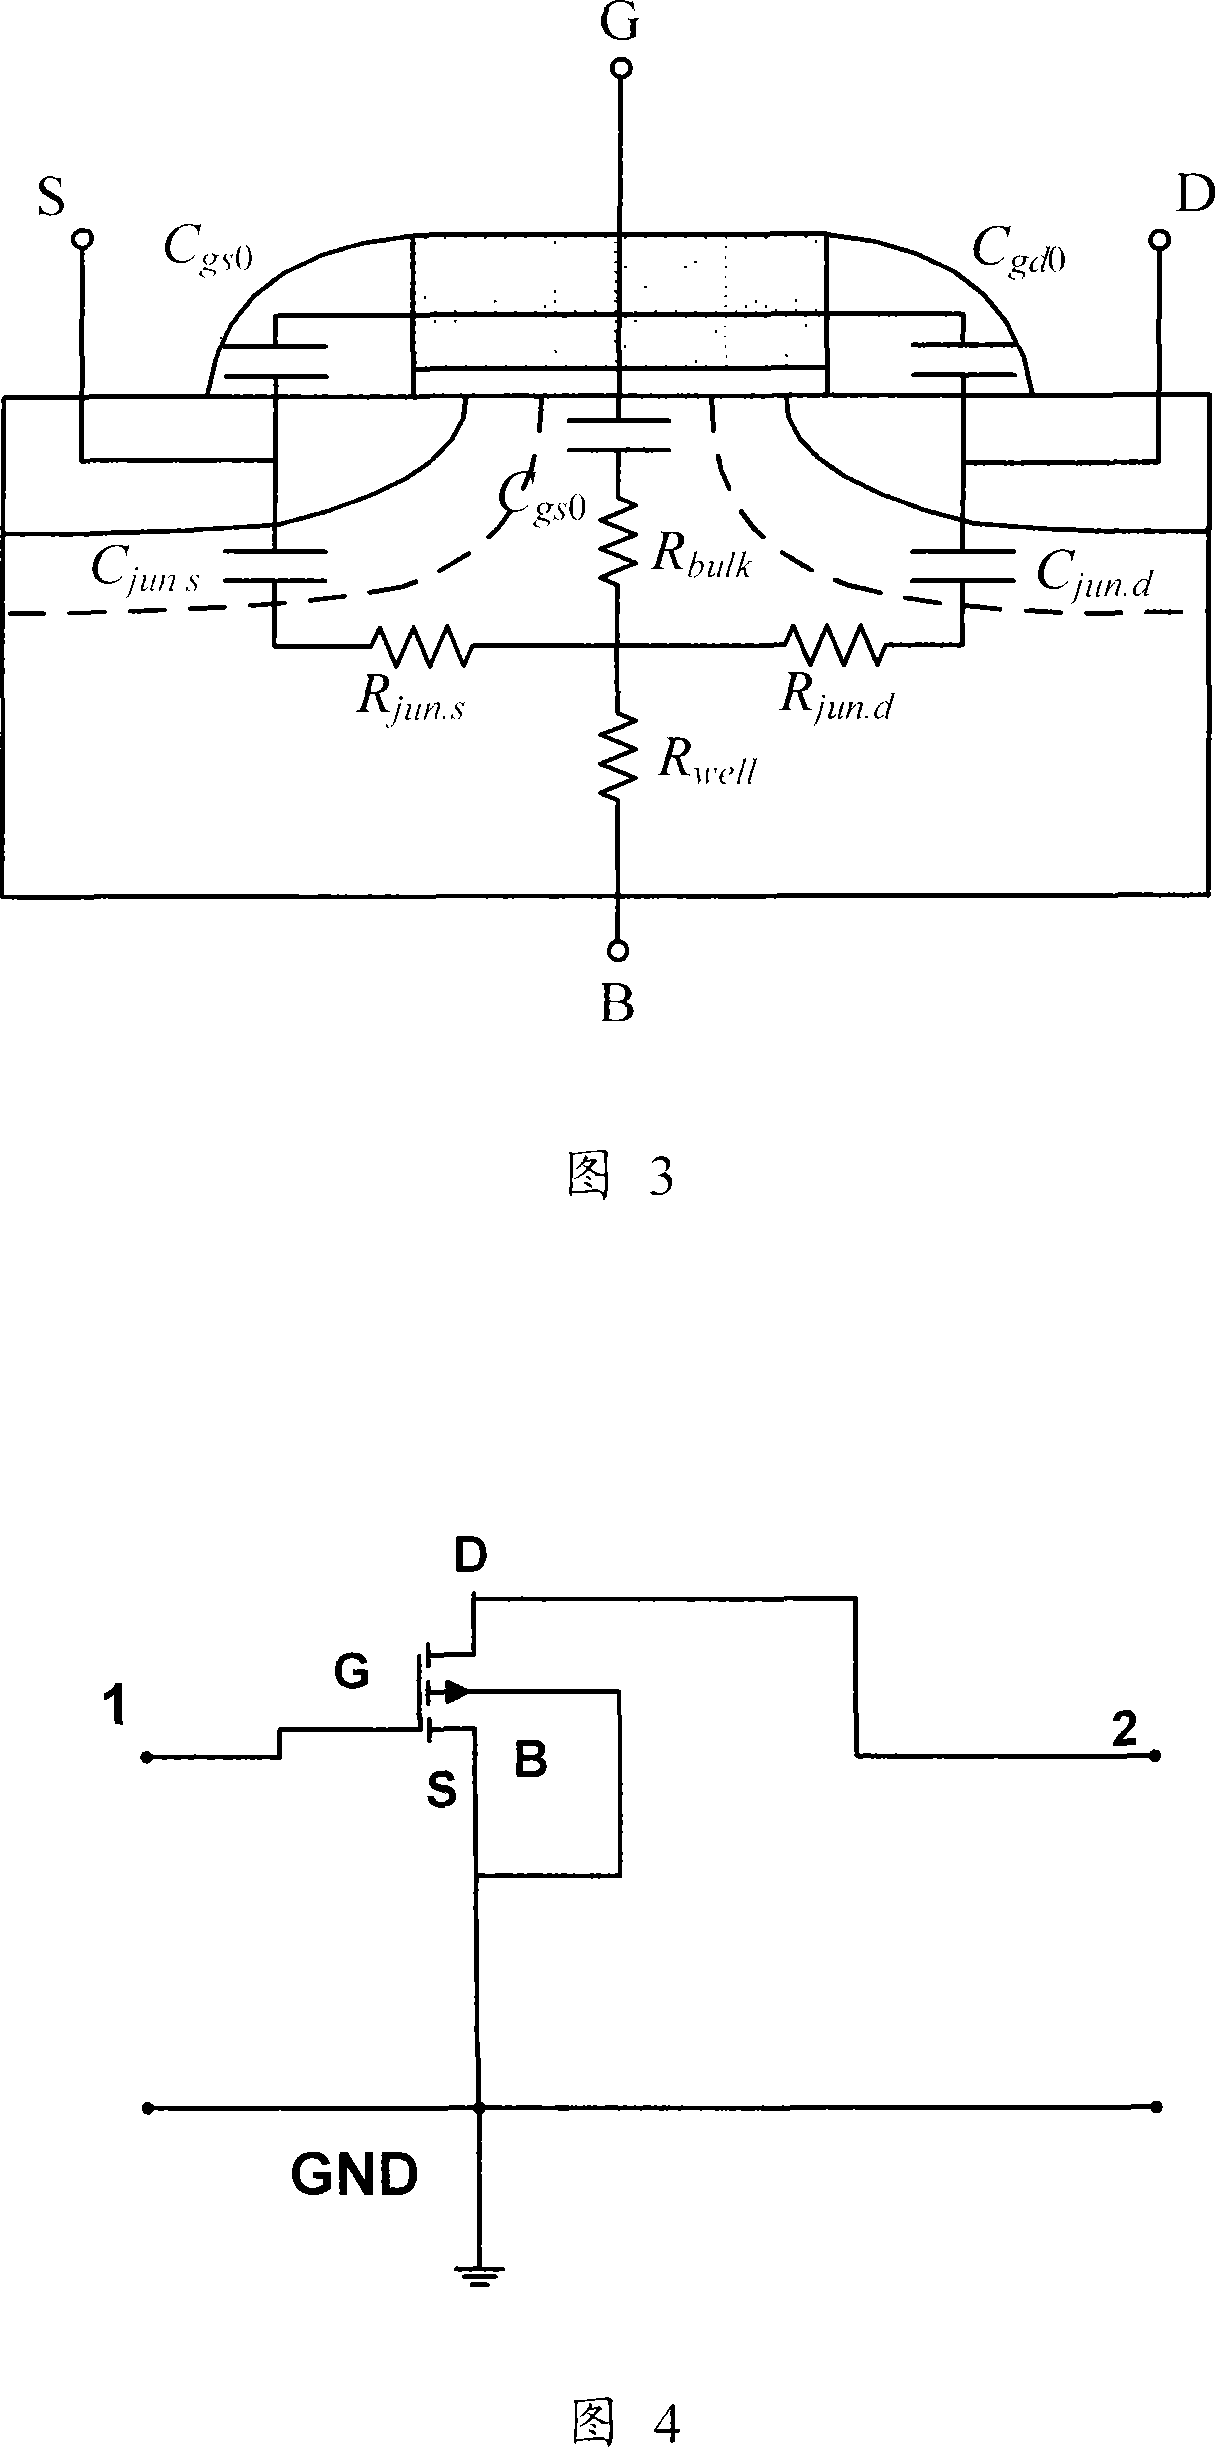 MOS transistor radio frequency circuit simulated macro model and its parameter extraction method